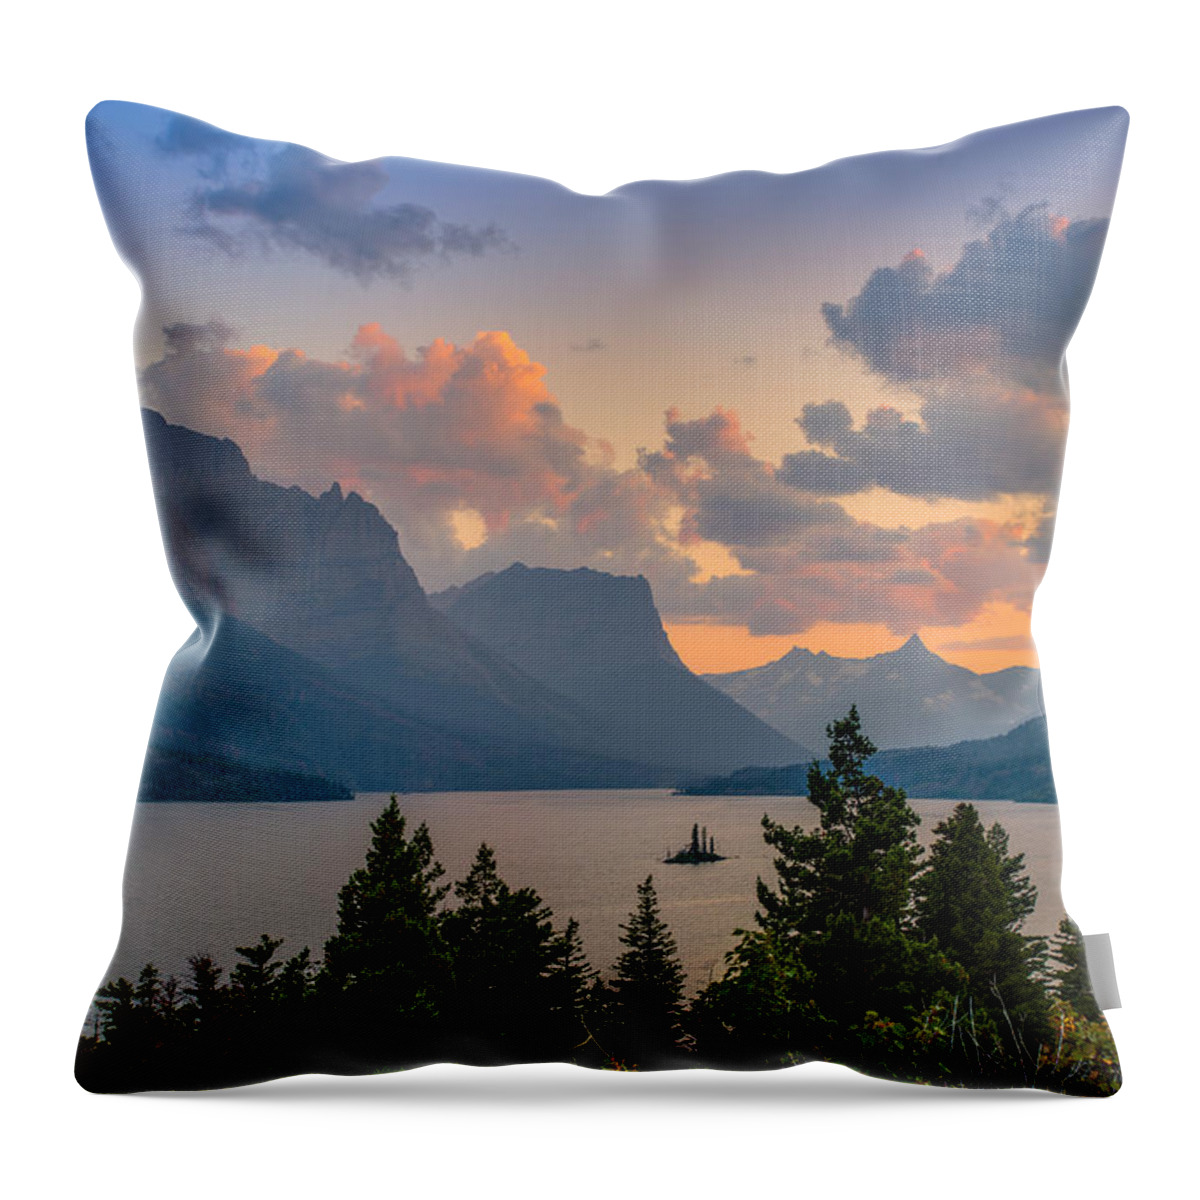 Glacier National Park Throw Pillow featuring the photograph Saint Mary Lake by Adam Mateo Fierro